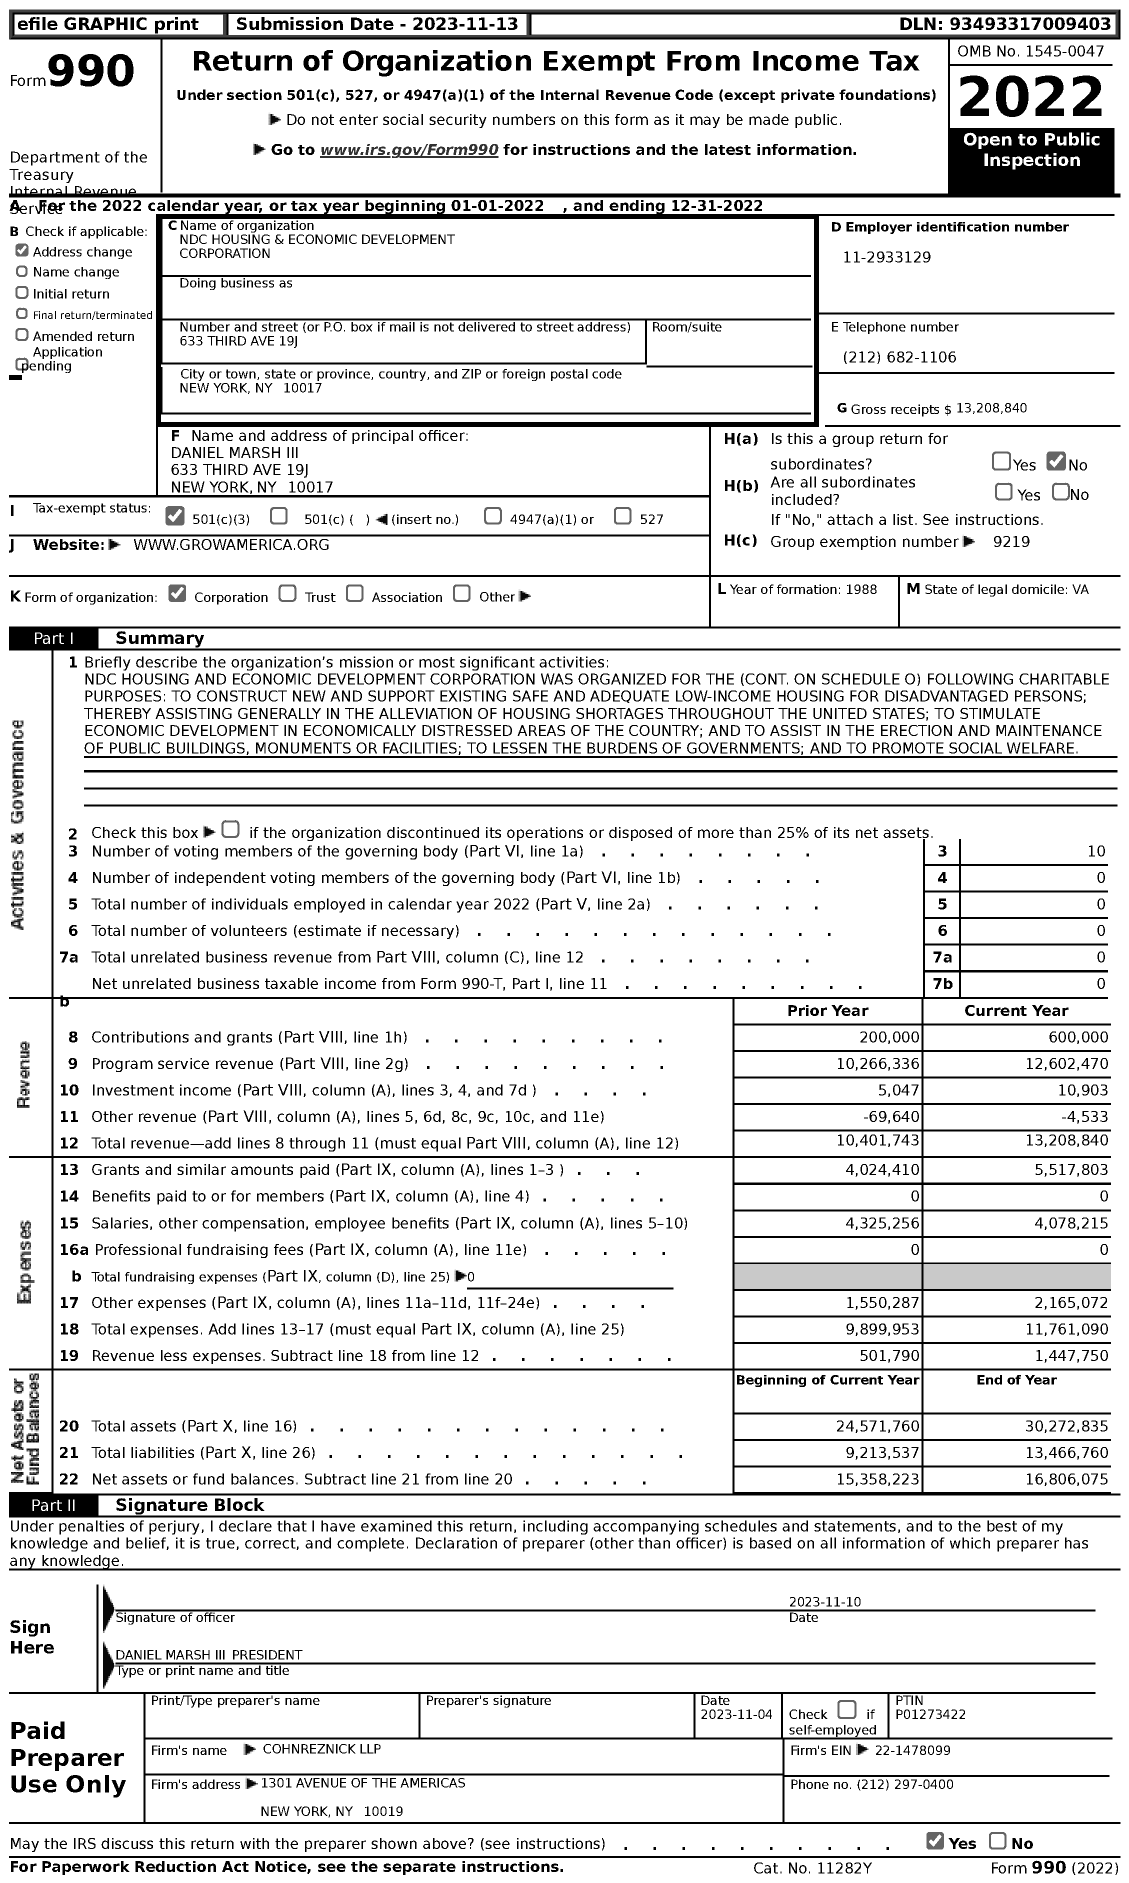 Image of first page of 2022 Form 990 for NDC HOUSING and ECONOMIC DEVELOPMENT corporation